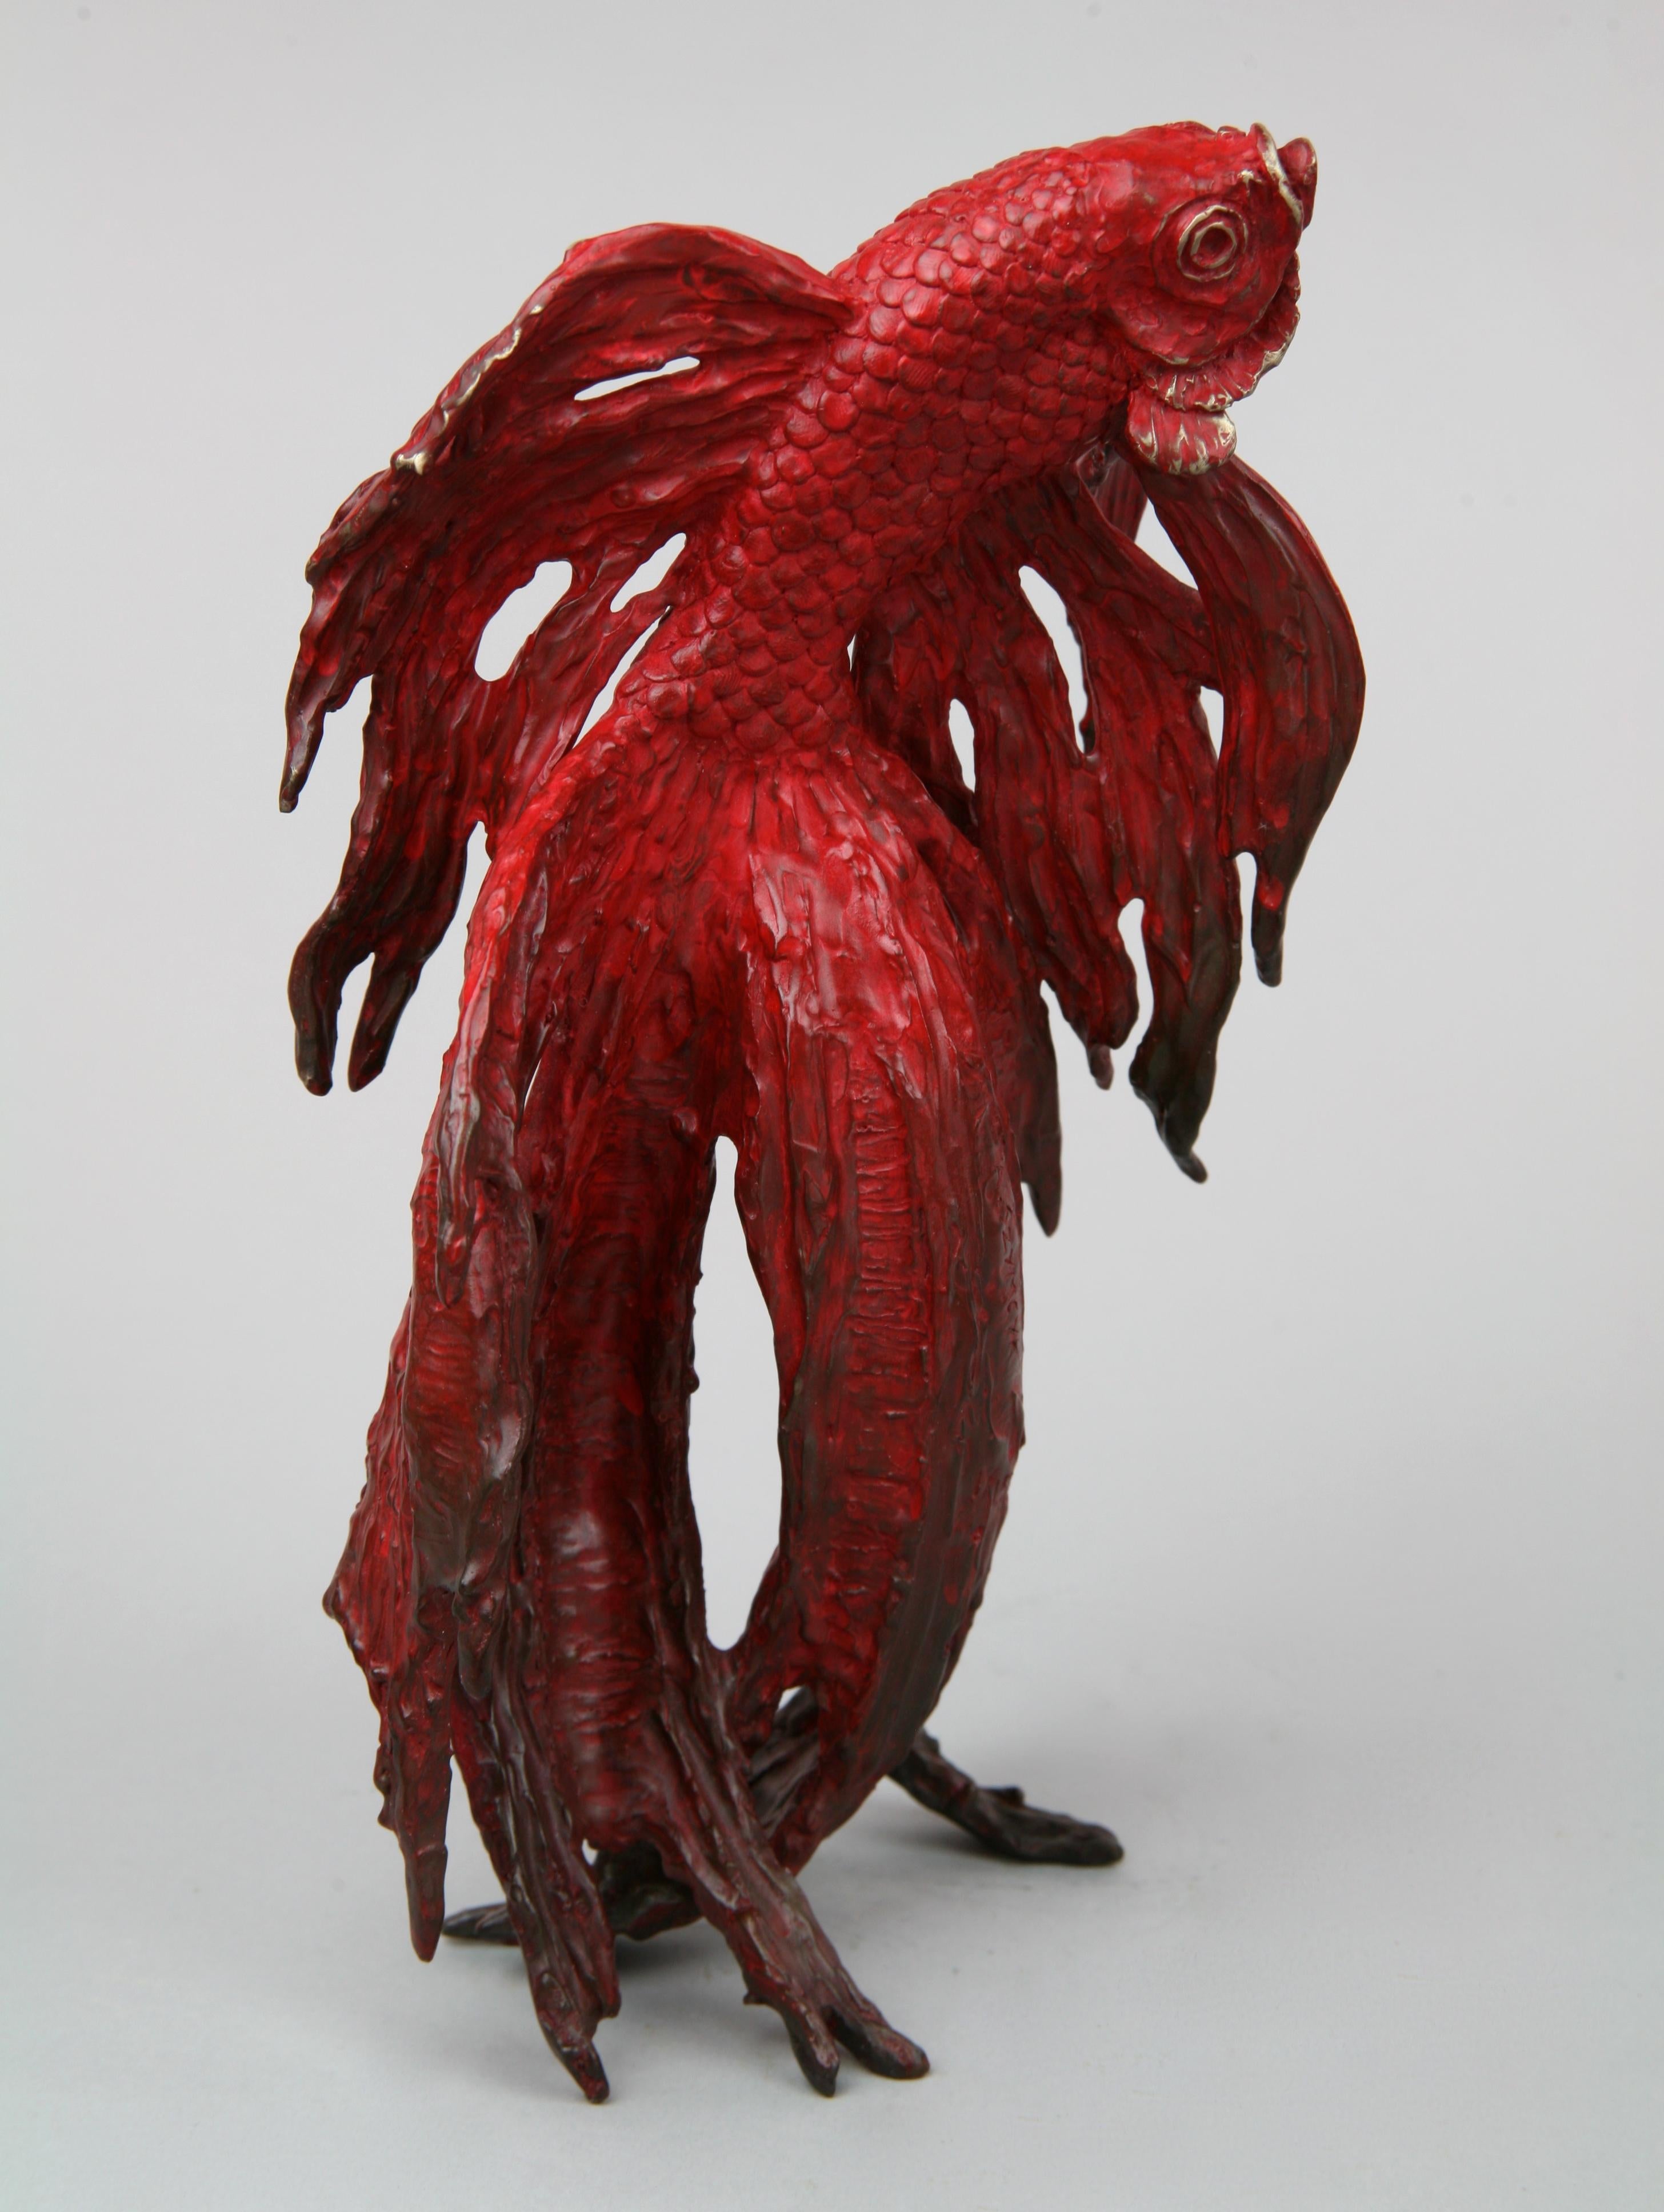 This contemporary marine sculpture by Andrzej Szymczyk depicts a Coral Fish and is expertly cast in bronze. The free standing piece is finished with a striking red coating, a hue reminiscent of its natural ocean environment, and features